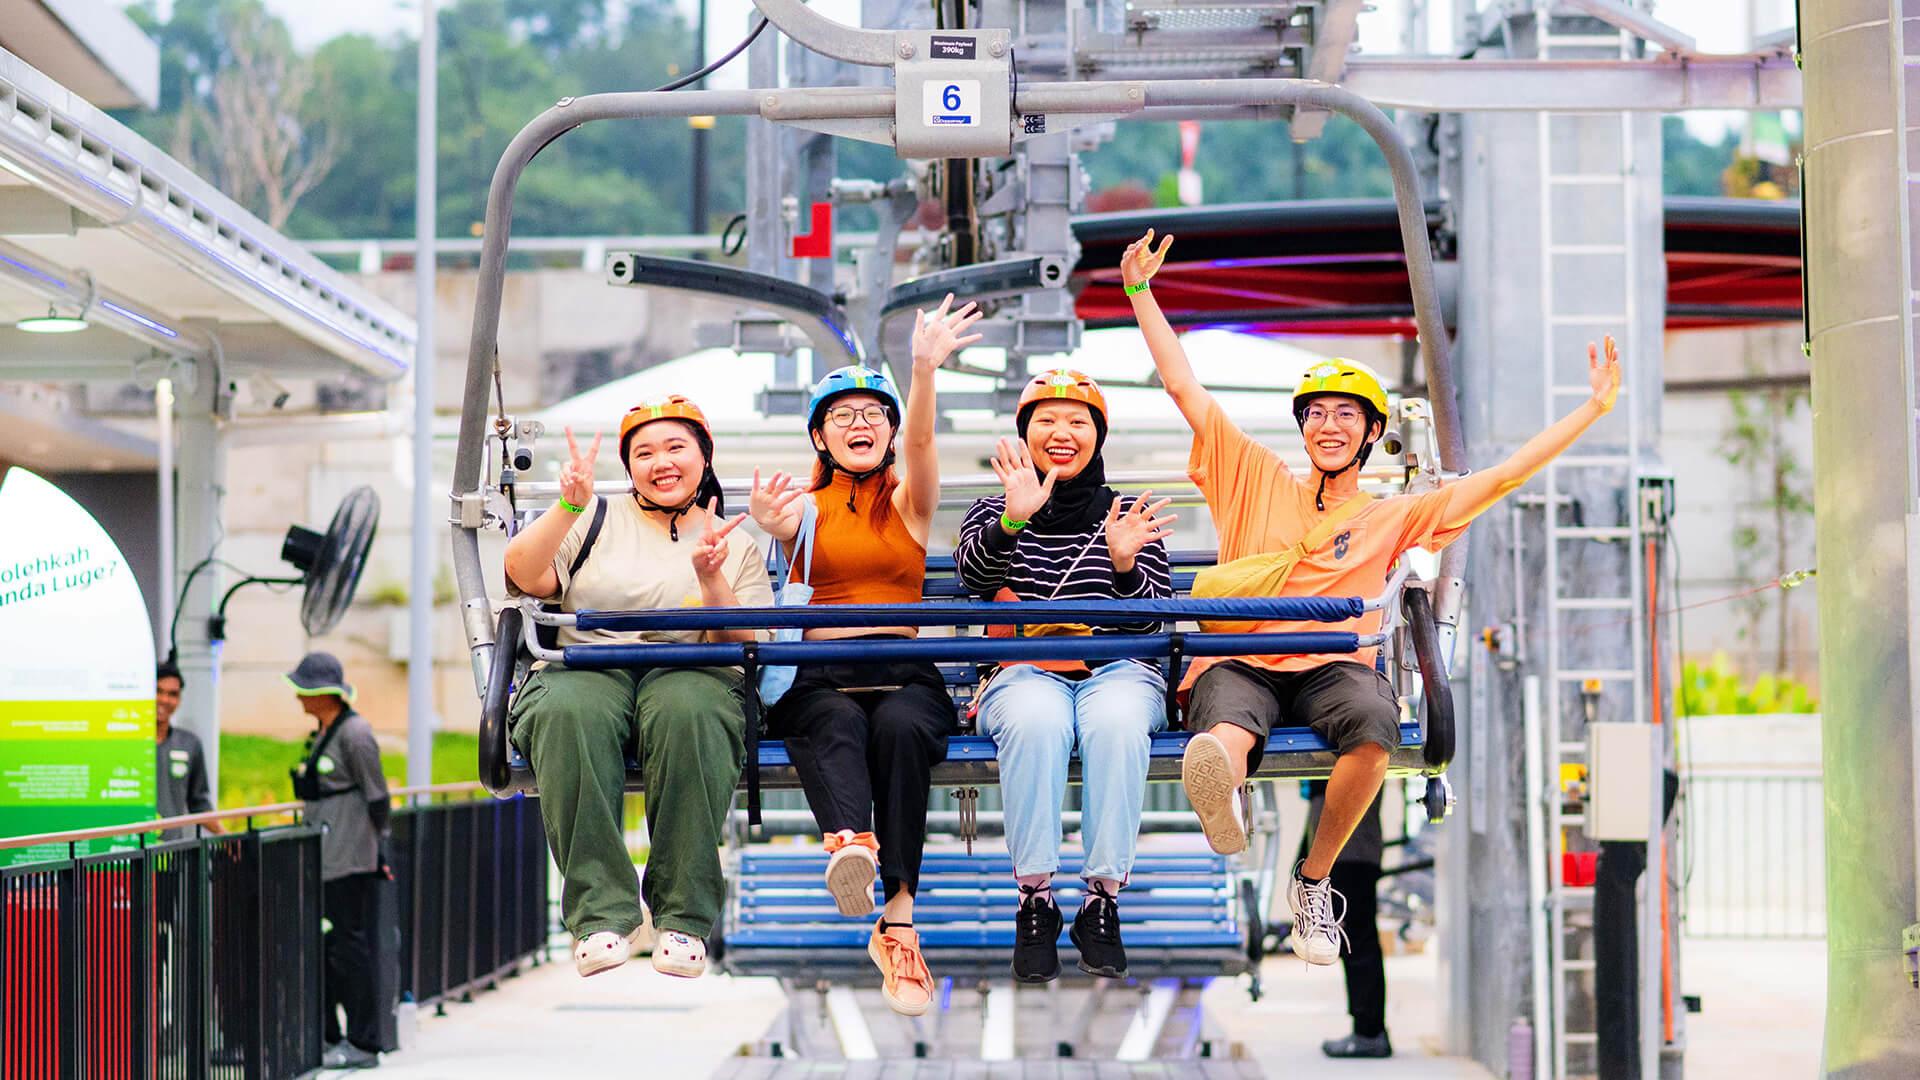 Four friends wave and pull the peace sign as they ride the chairlift.